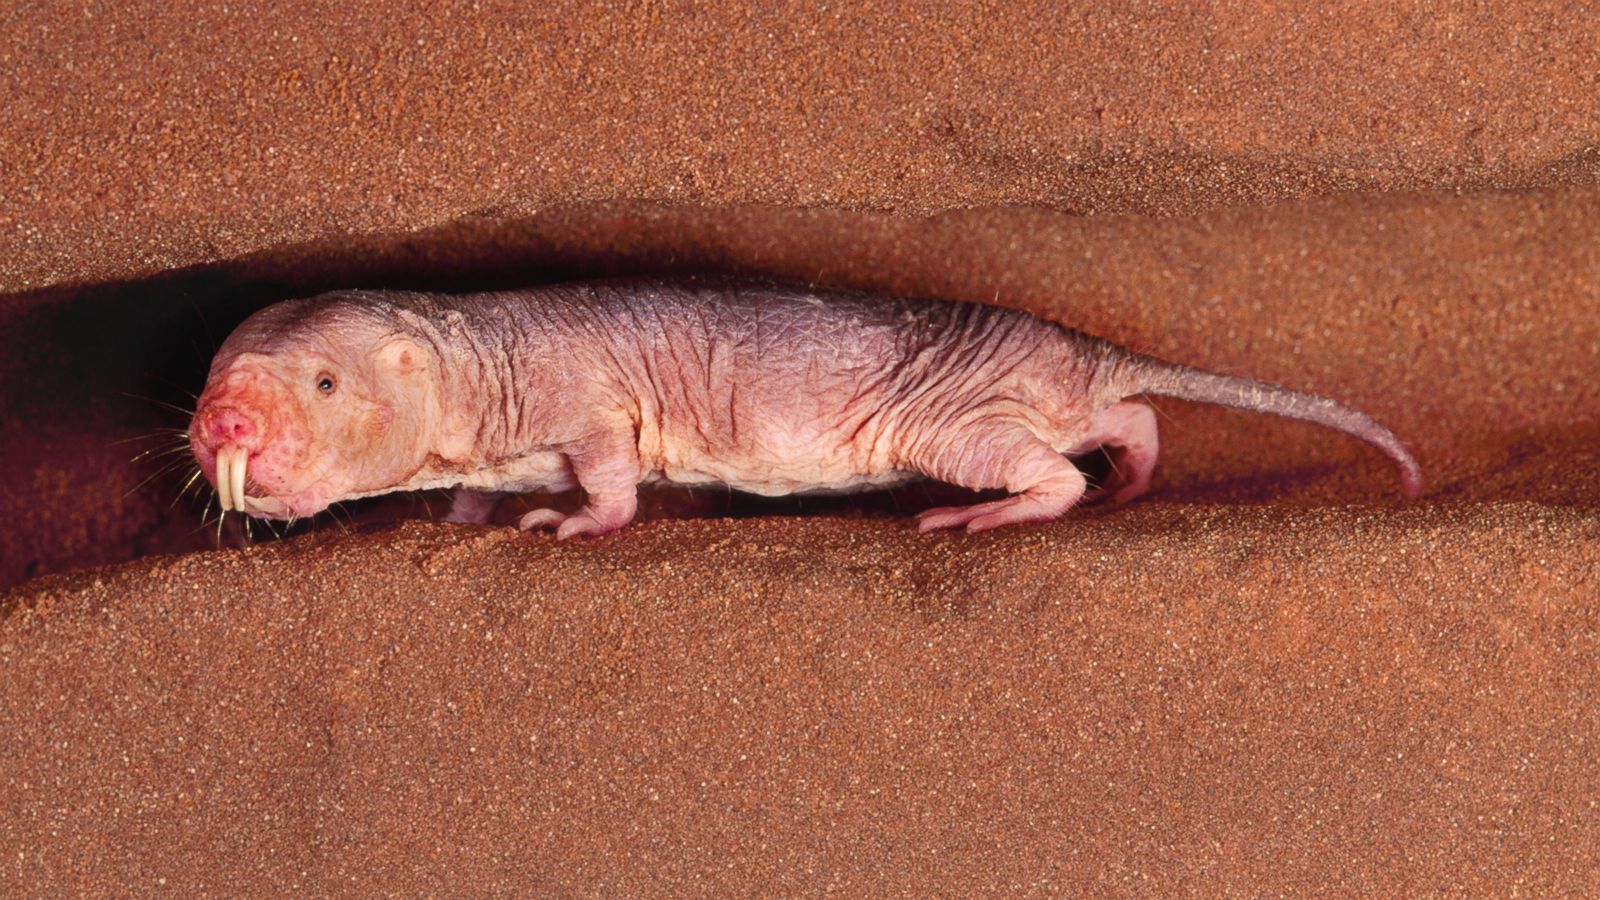 How This Naked Mole Rat Could Help You Live Longer - ABC News